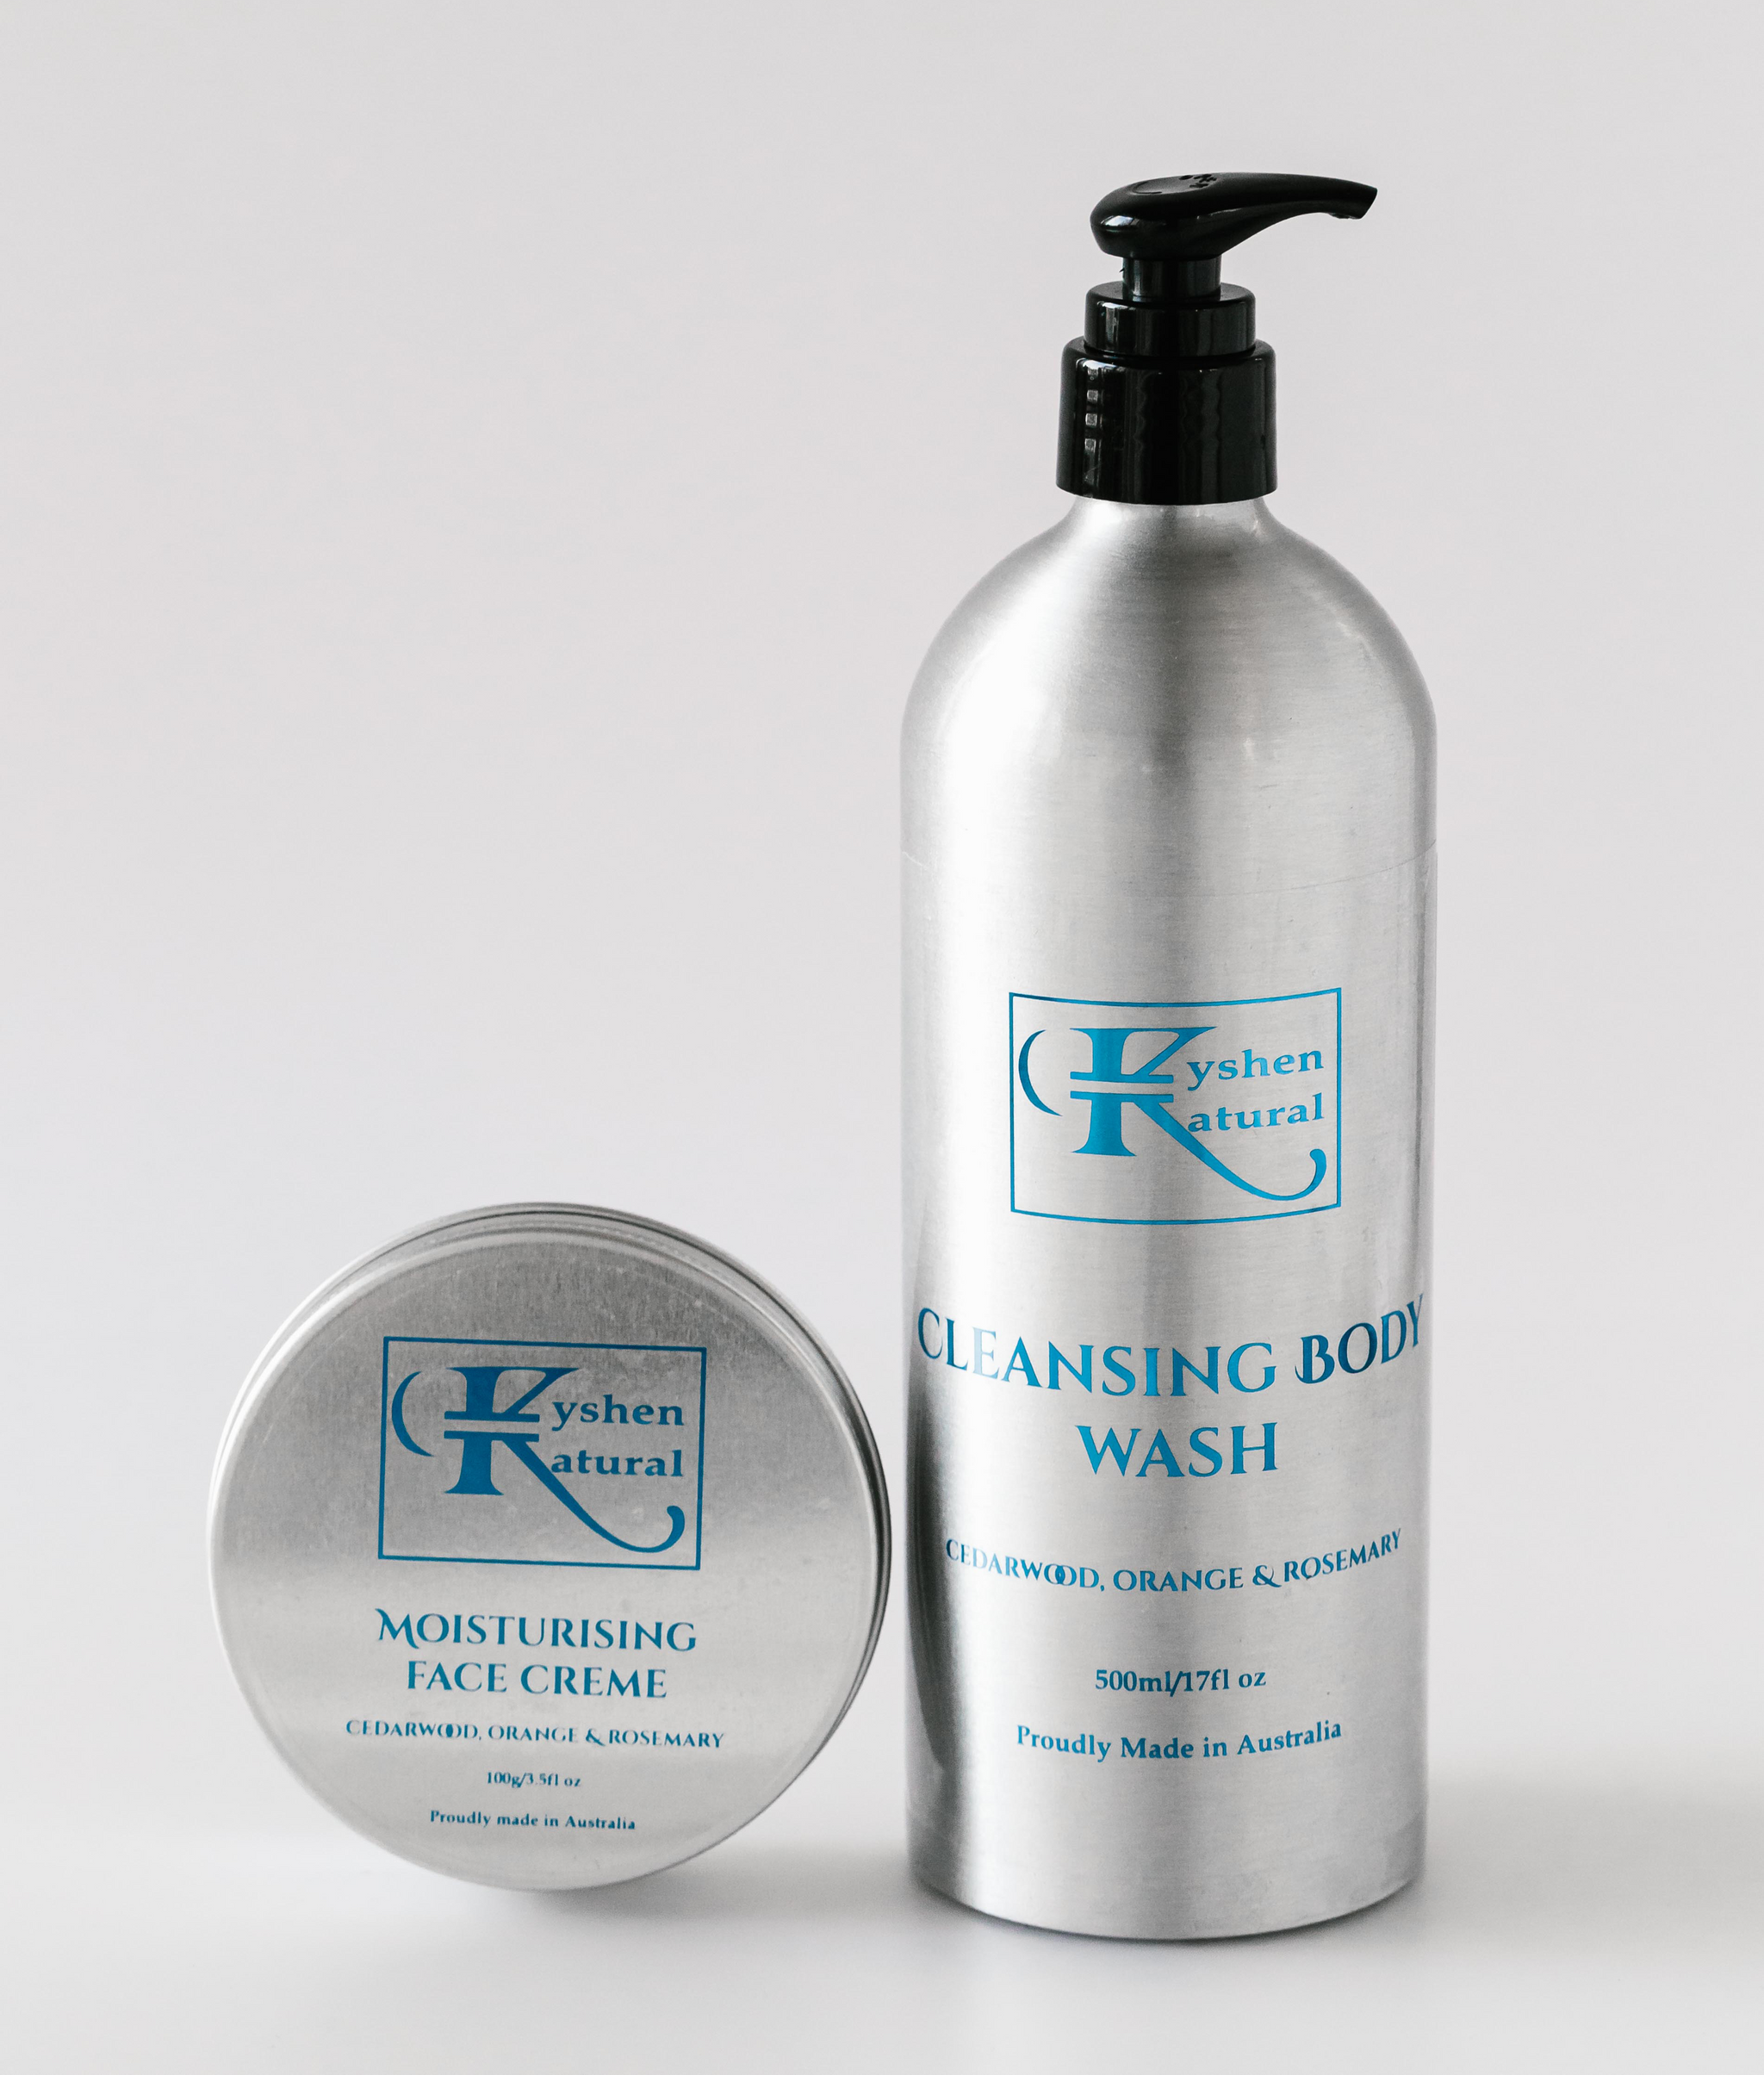 Men's Face Creme and Cleansing Body Wash